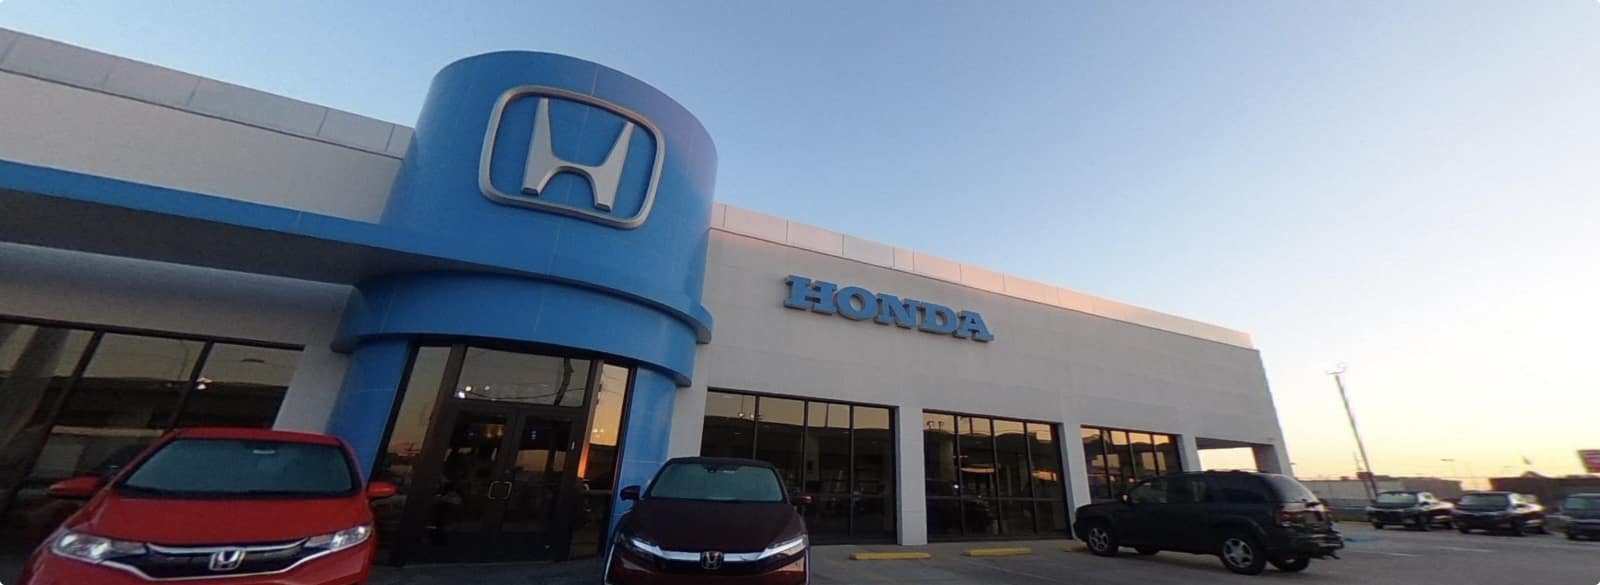 An exterior shot of a Honda dealership in the day.